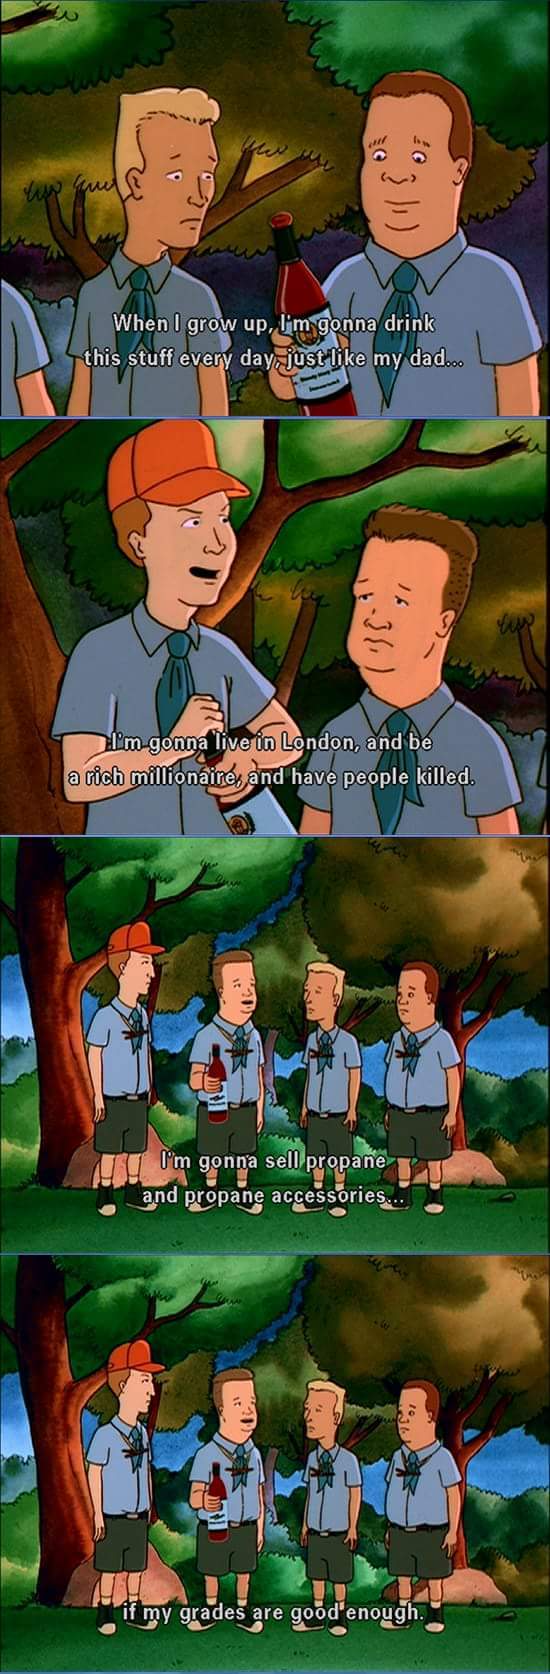 King of the hill is awesome - meme